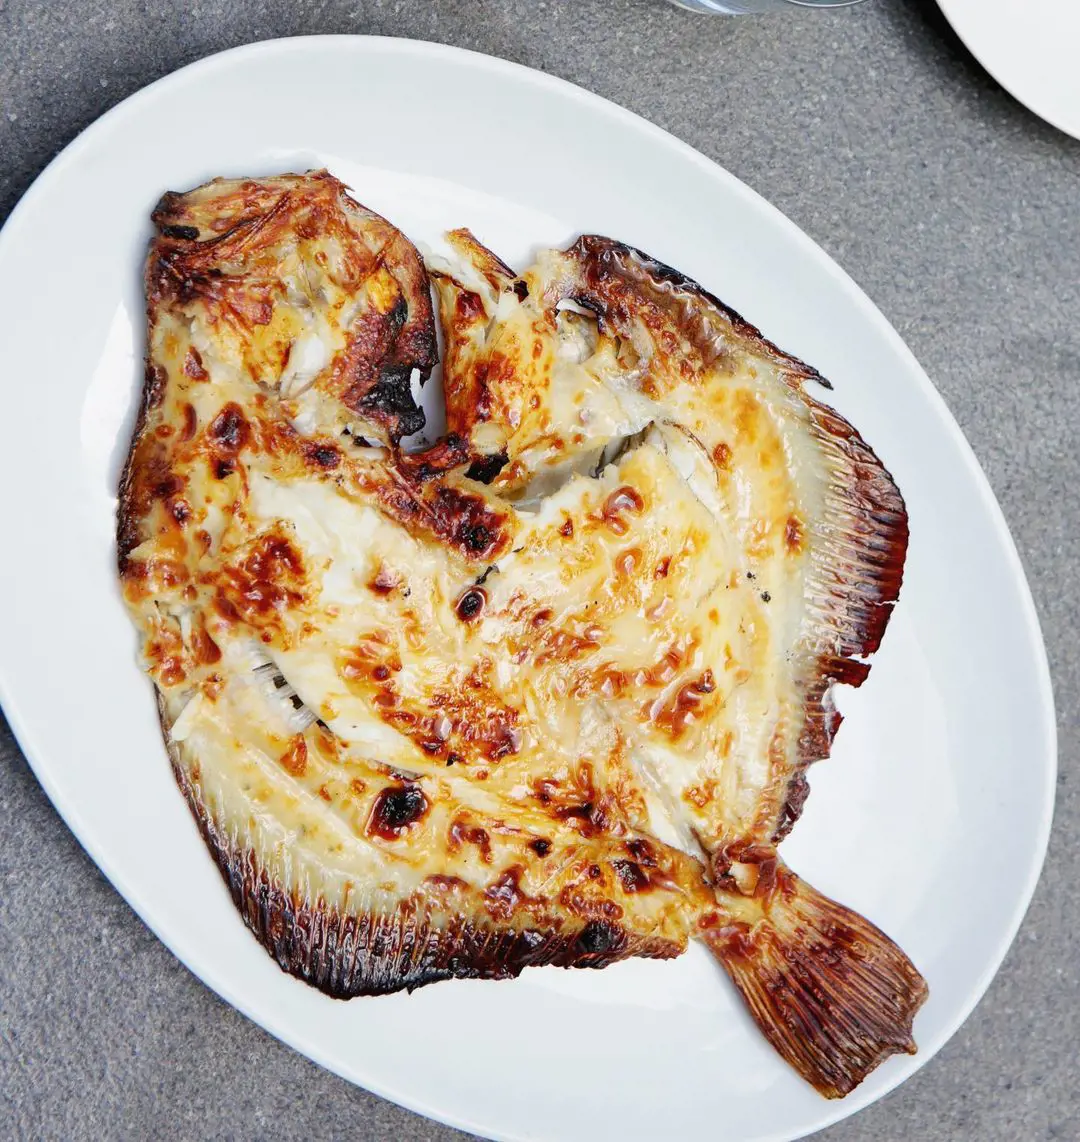 Whole Grilled turbot